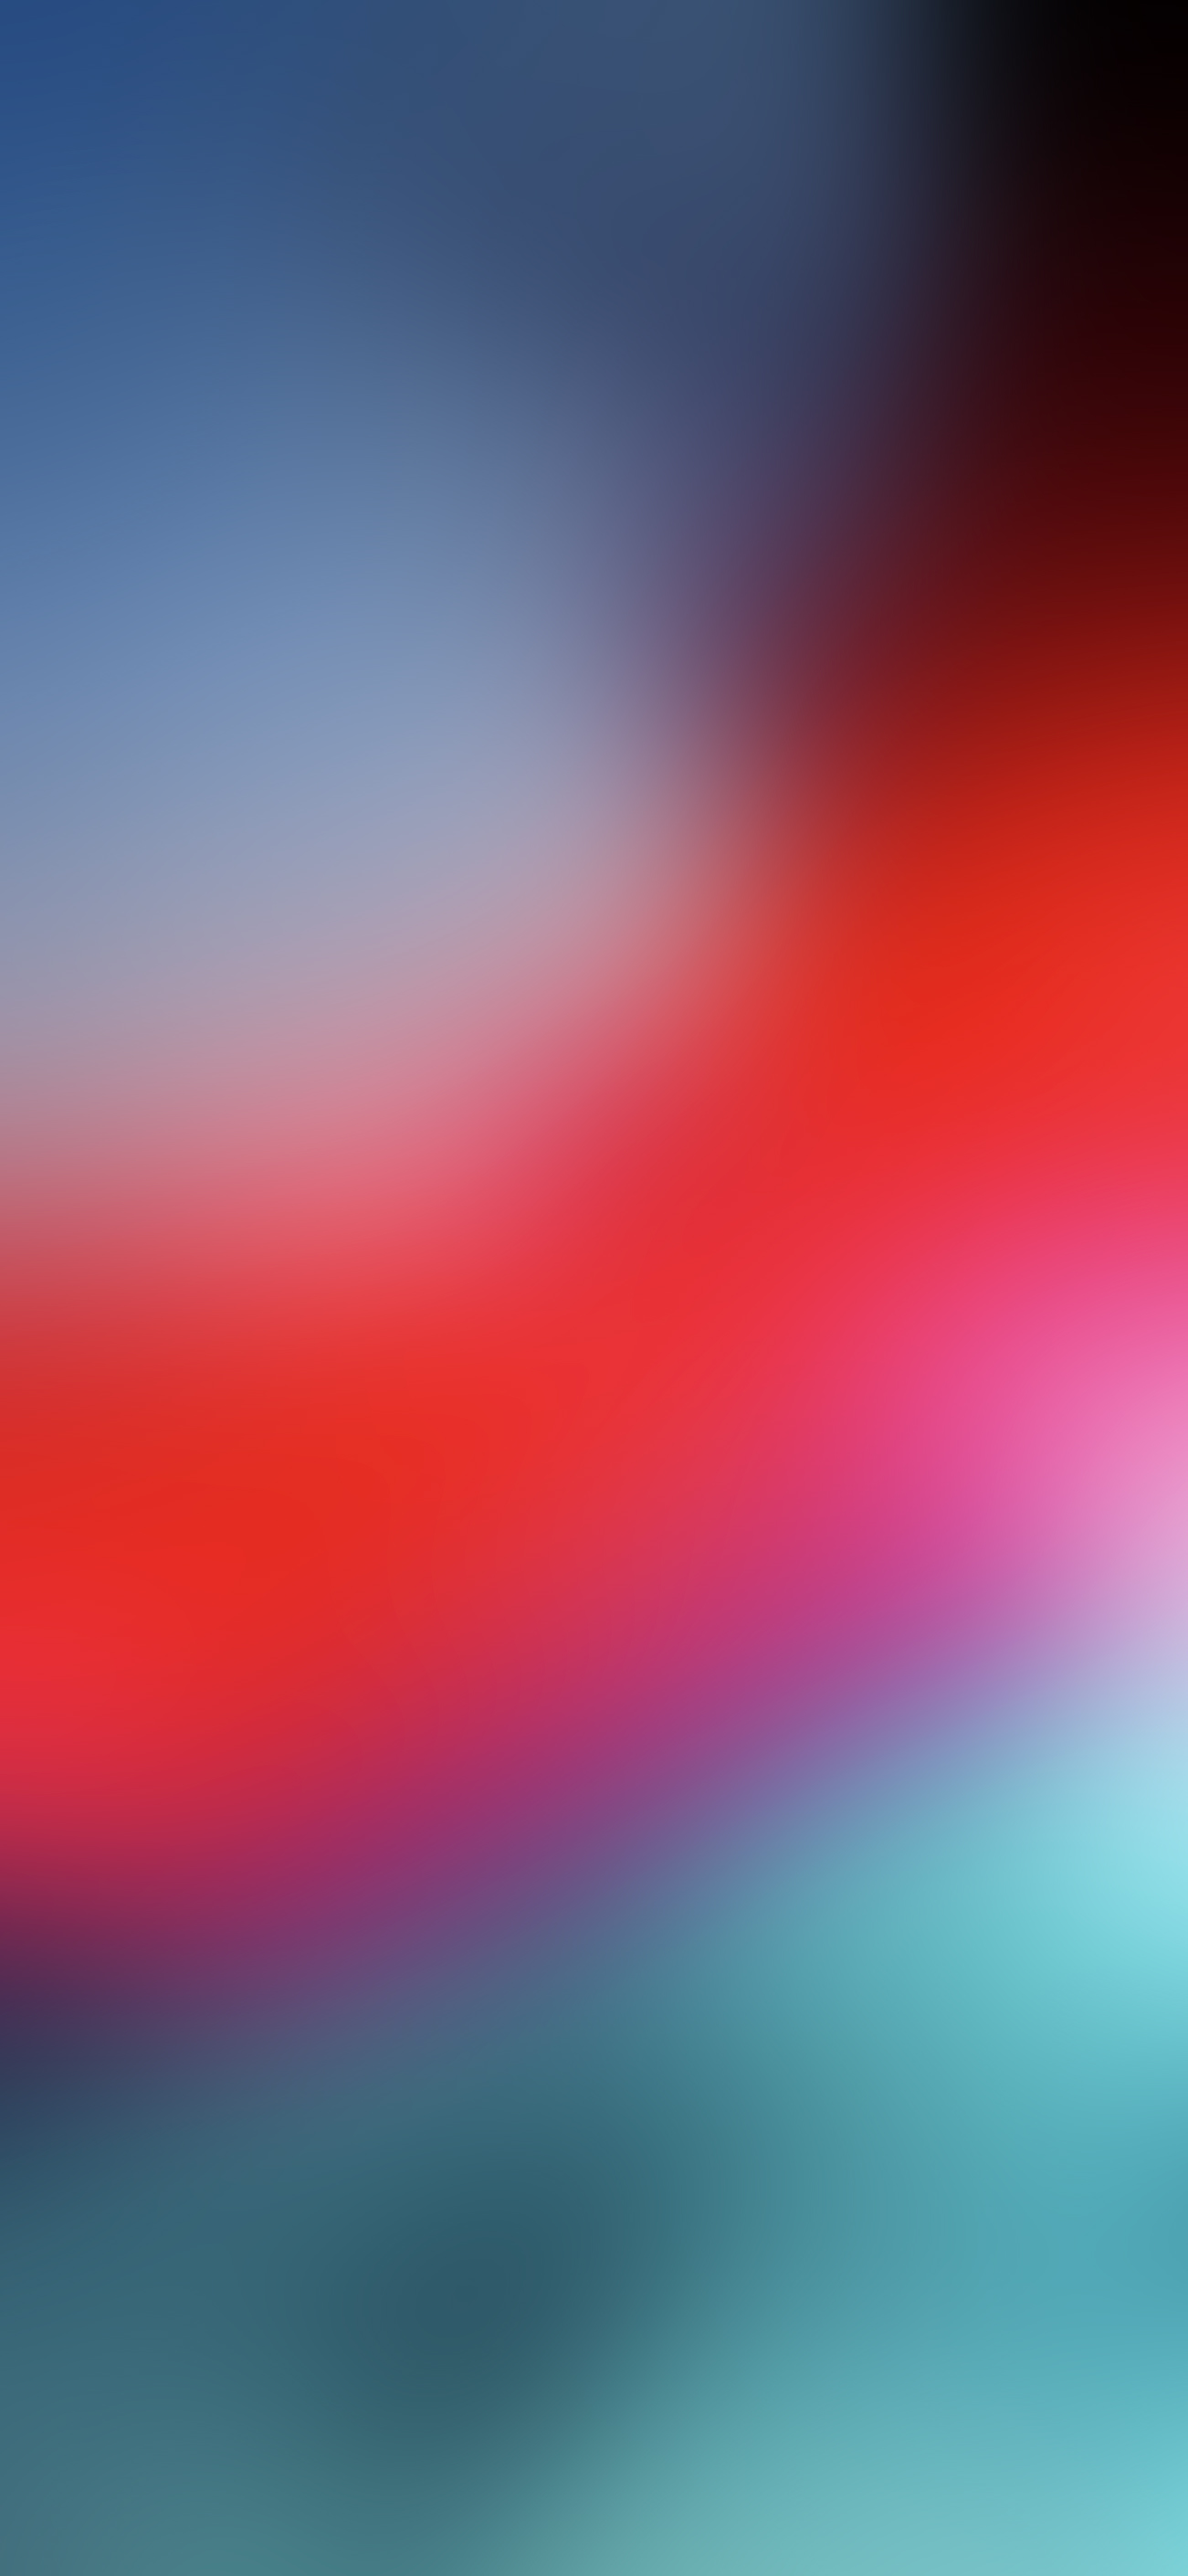 Blurred iOS 12 Stock Wallpaper - Wallpapers Central